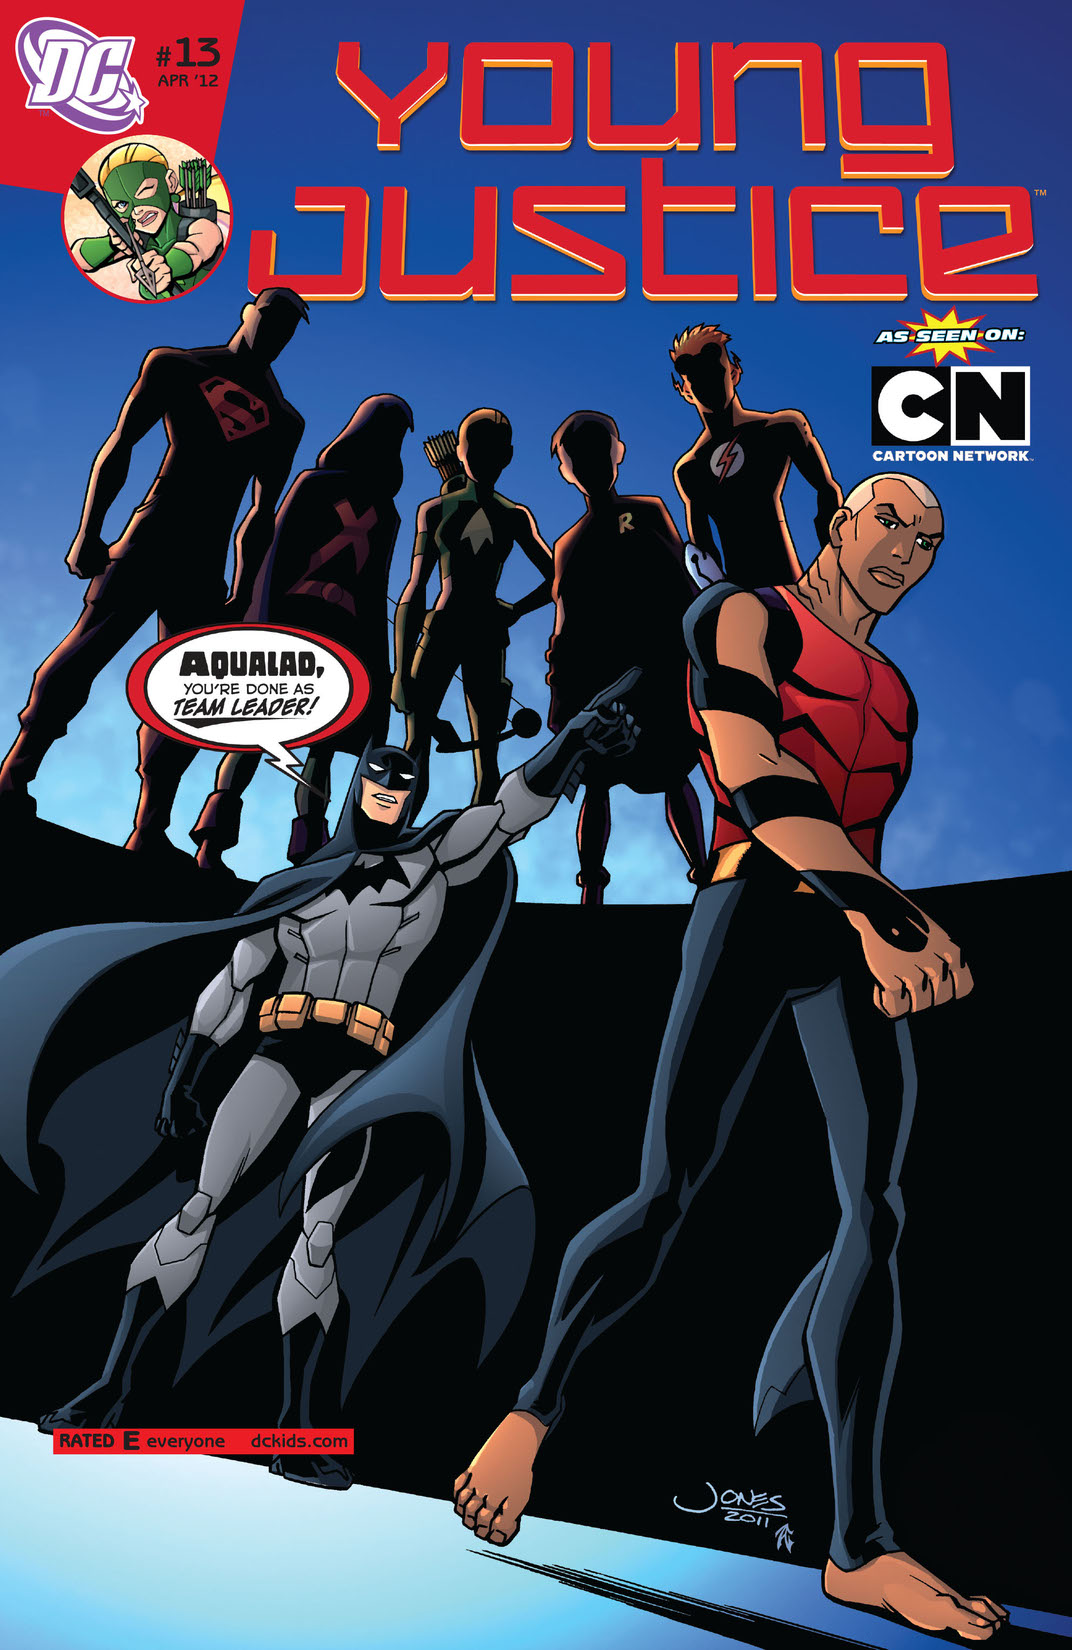 Young Justice (2011-2013) #13 preview images